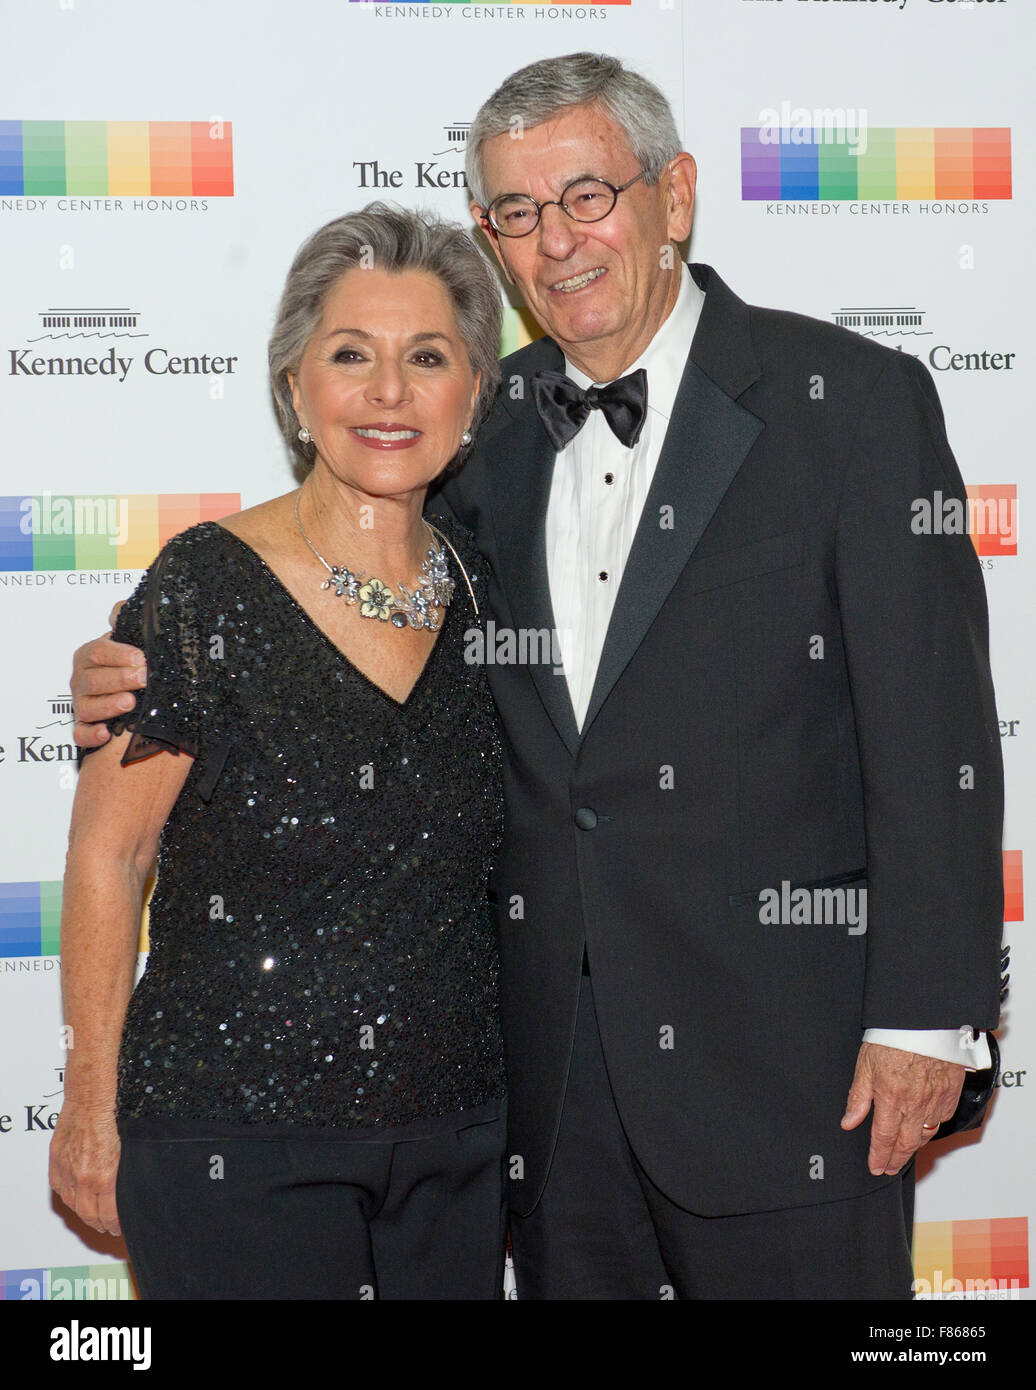 United States Senator Barbara Boxer (Democrat of California) and her husband, Stewart, arrive for the formal Artist's Dinner honoring the recipients of the 38th Annual Kennedy Center Honors hosted by United States Secretary of State John F. Kerry at the U.S. Department of State in Washington, DC on Saturday, December 5, 2015. The 2015 honorees are: singer-songwriter Carole King, filmmaker George Lucas, actress and singer Rita Moreno, conductor Seiji Ozawa, and actress and Broadway star Cicely Tyson. Credit: Ron Sachs/Pool via CNP - NO WIRE SERVICE - Stock Photo